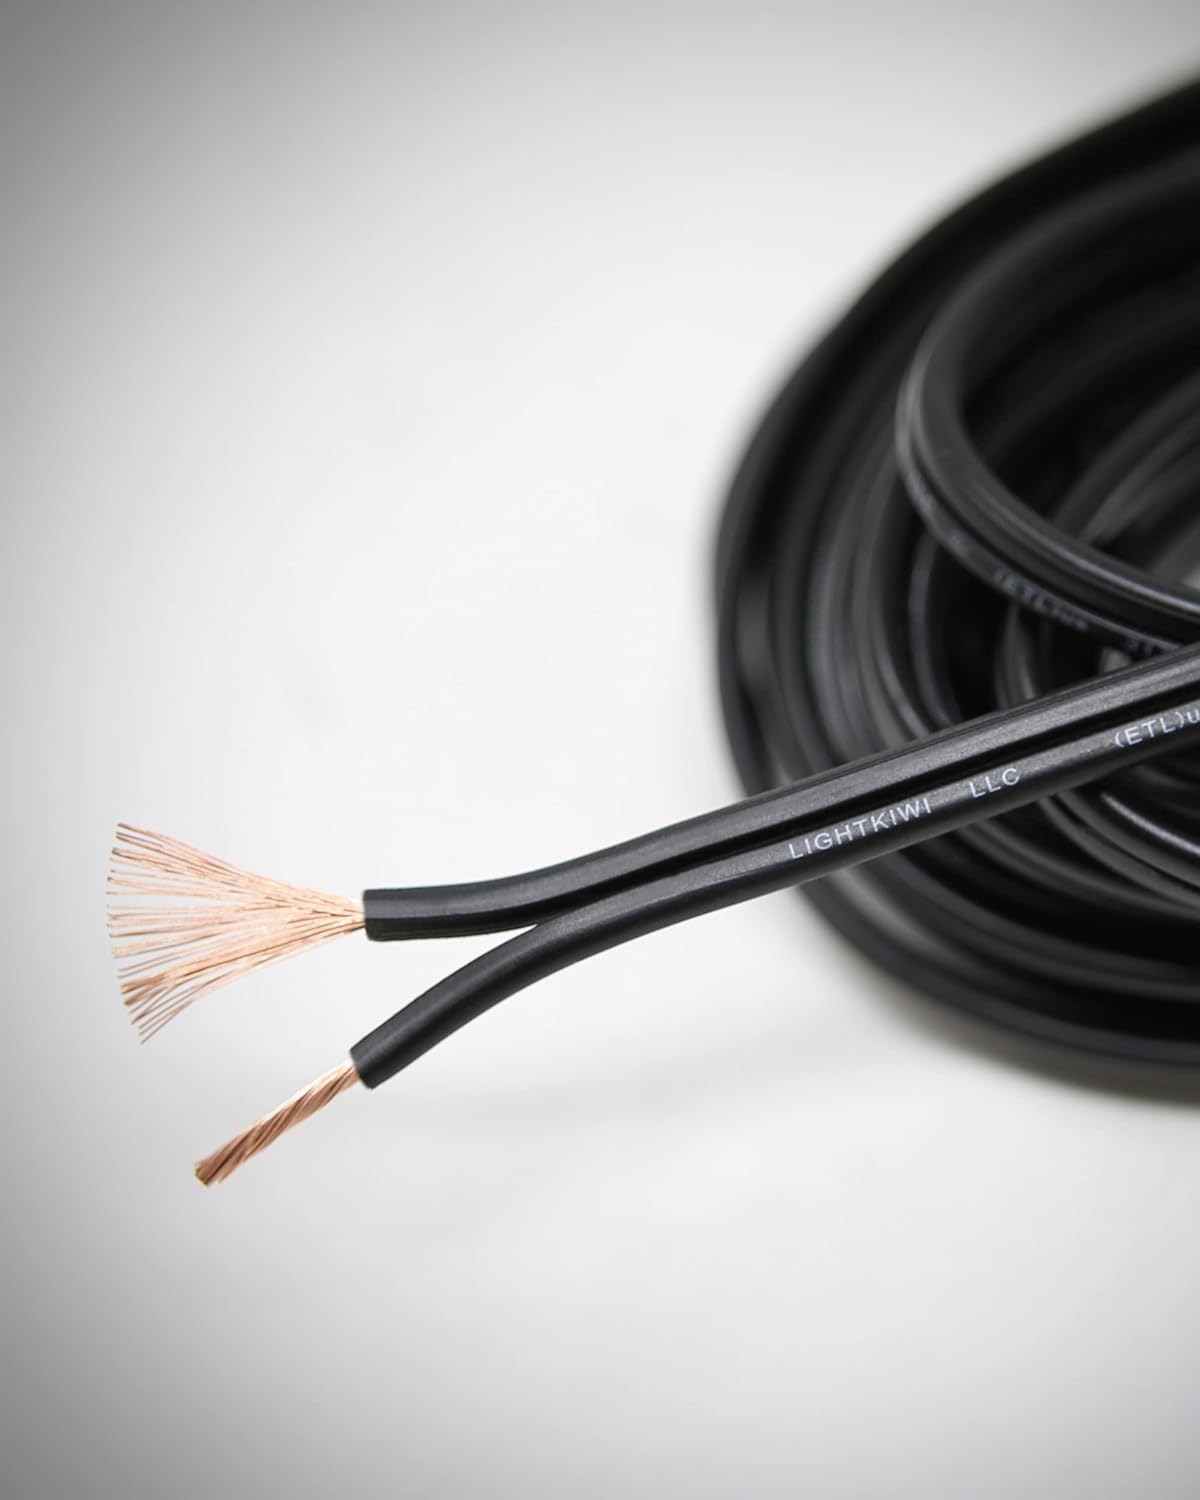 Zonegrace 14AWG 2-Conductor 14/2 Direct Burial Wire for Low Voltage  Landscape Lighting, 265ft